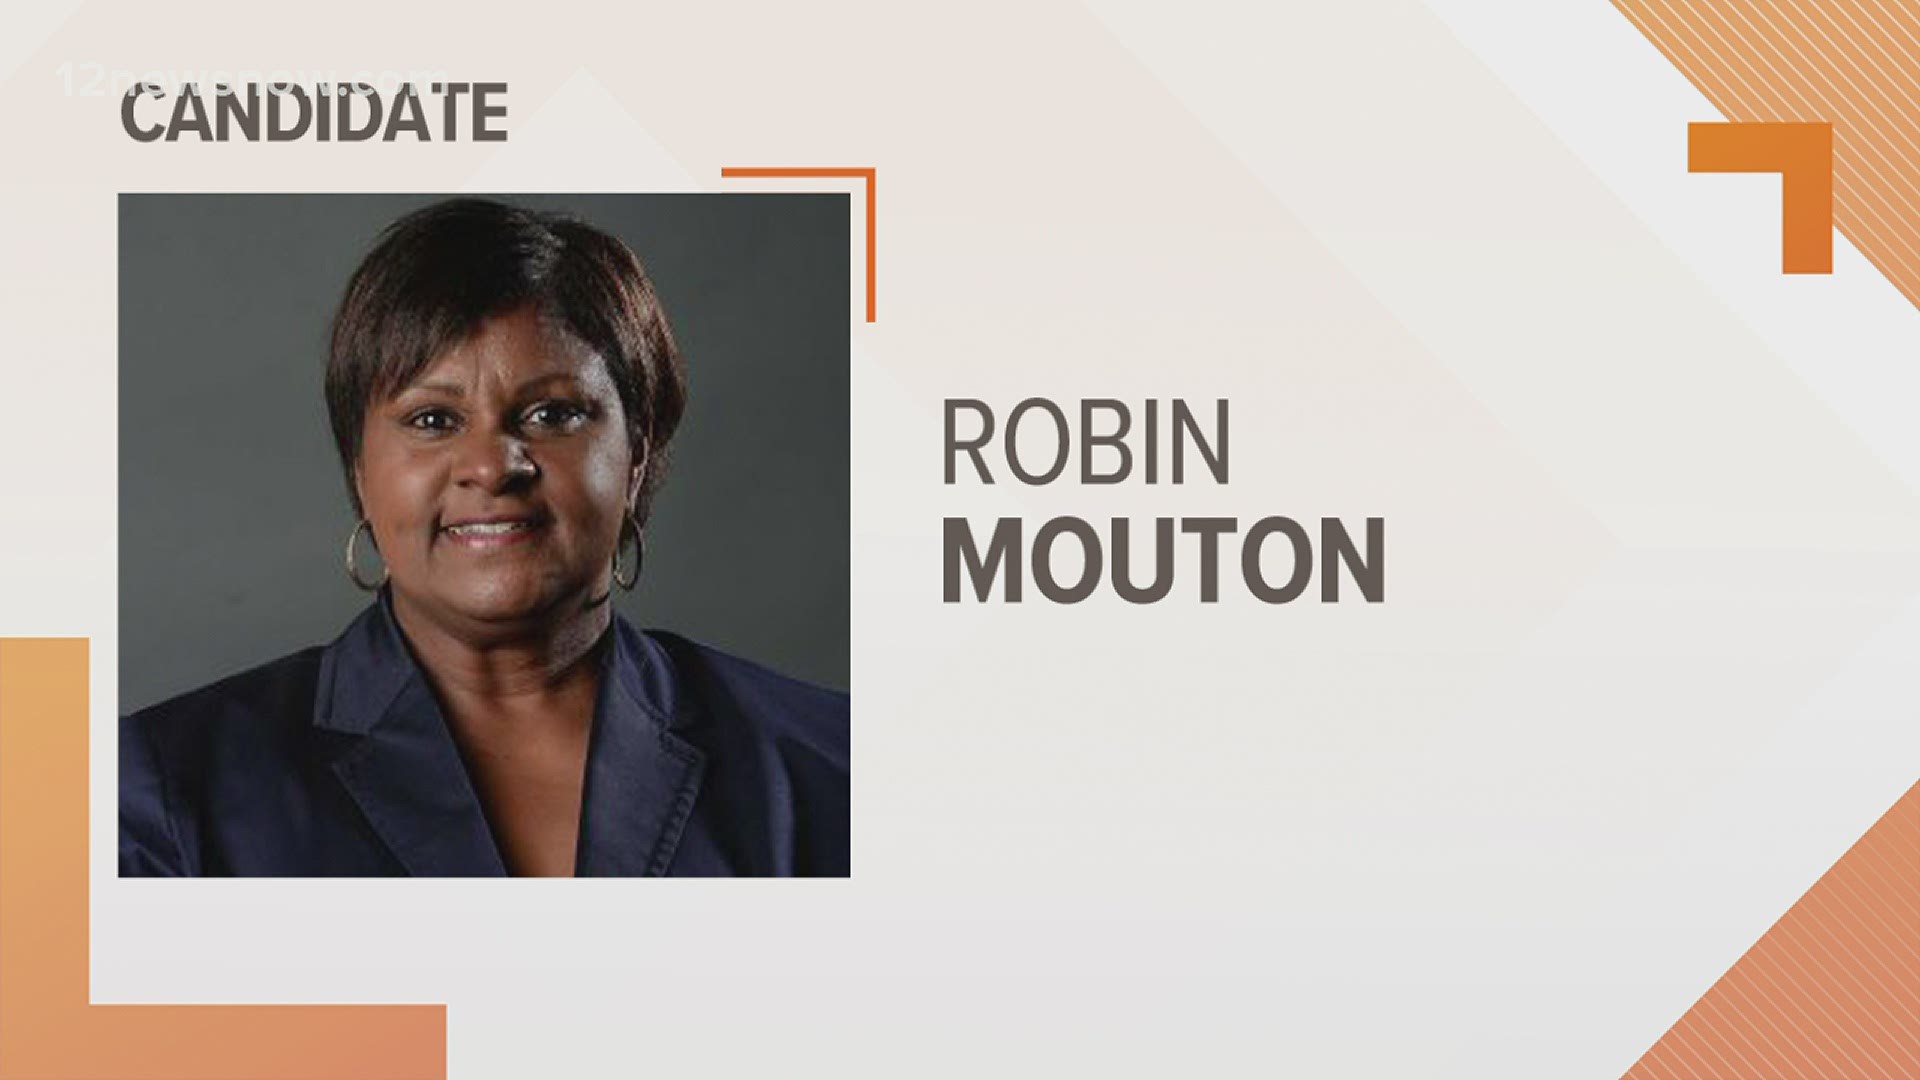 Beaumont City Council woman Robin Mouton has filed to run for mayor of Beaumont.